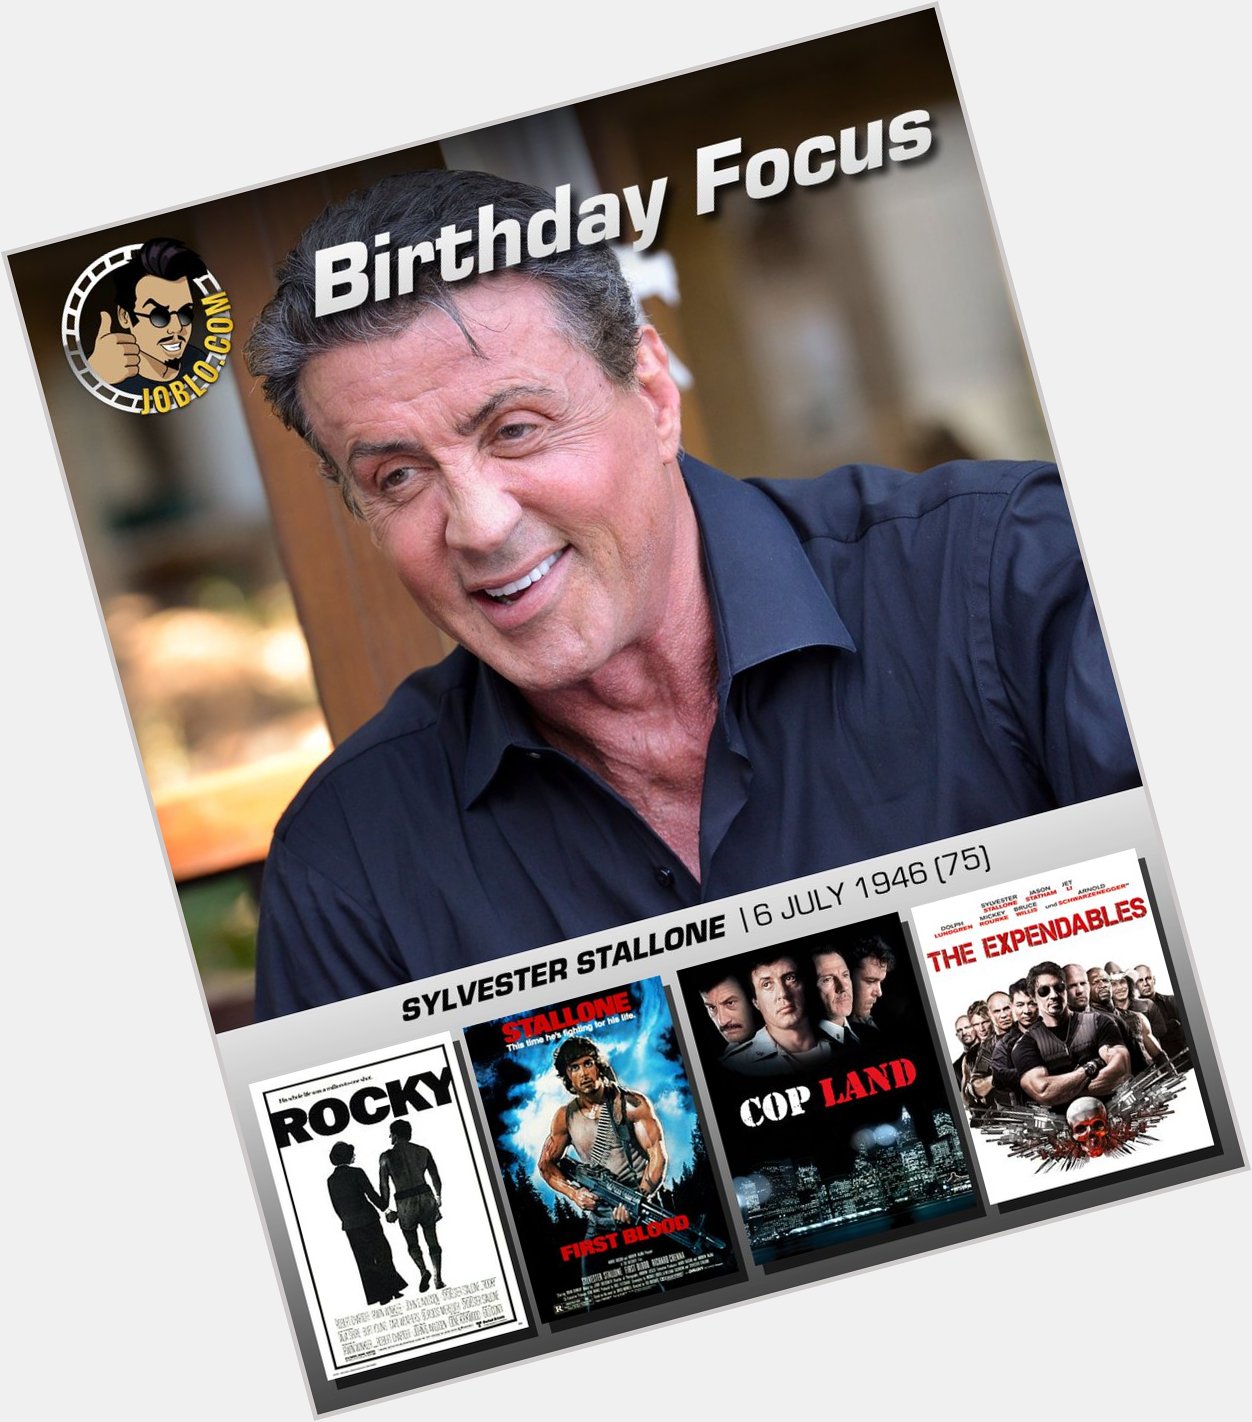 Wishing the incredible Sylvester Stallone a very happy 75th birthday! 